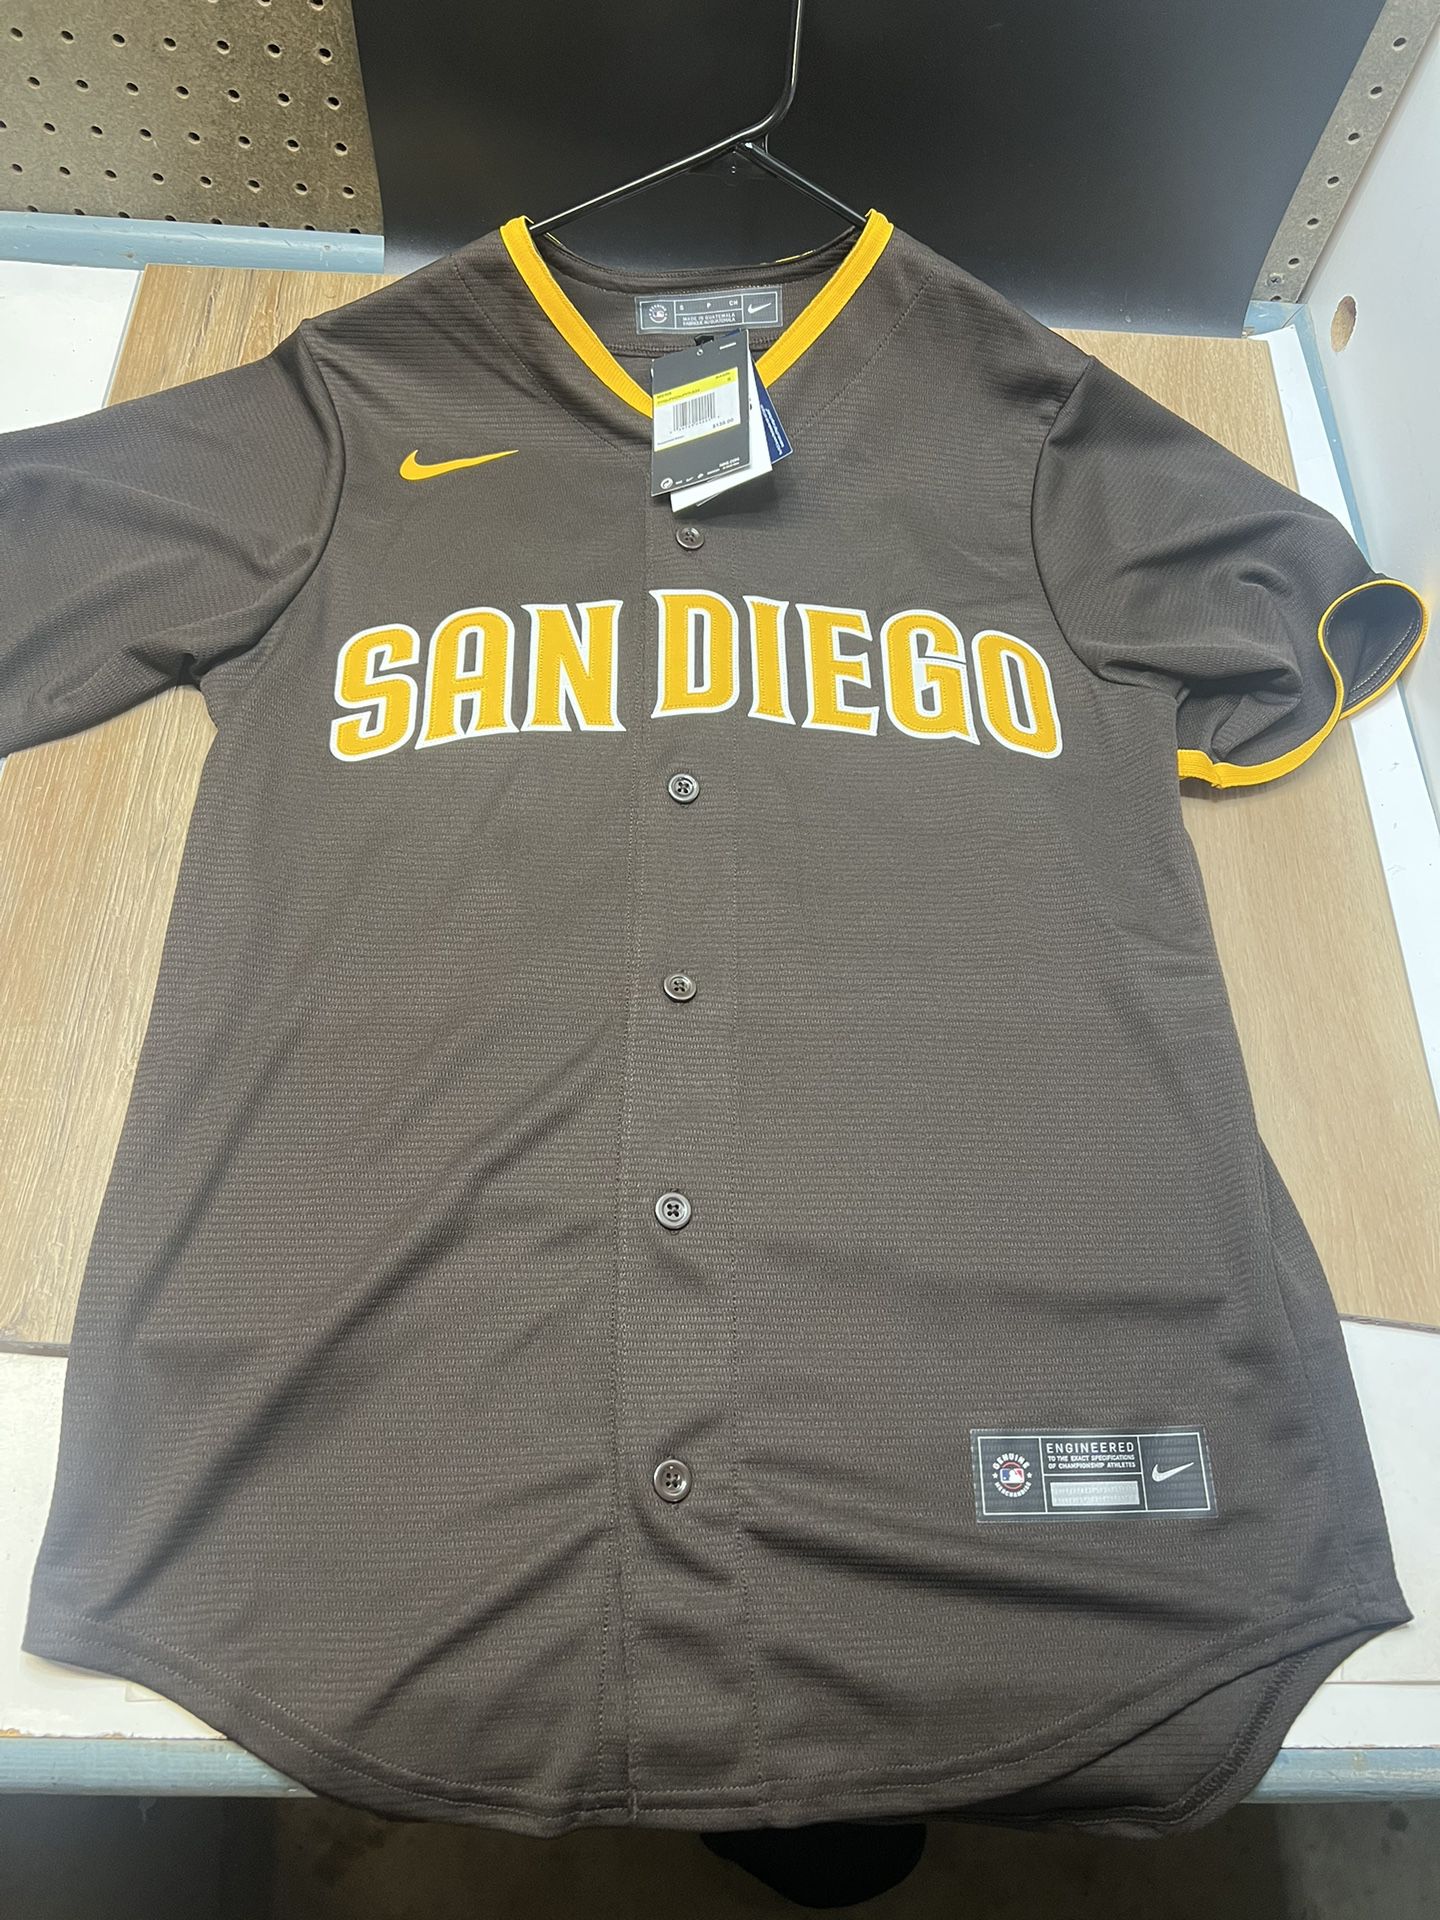 snell padres jersey